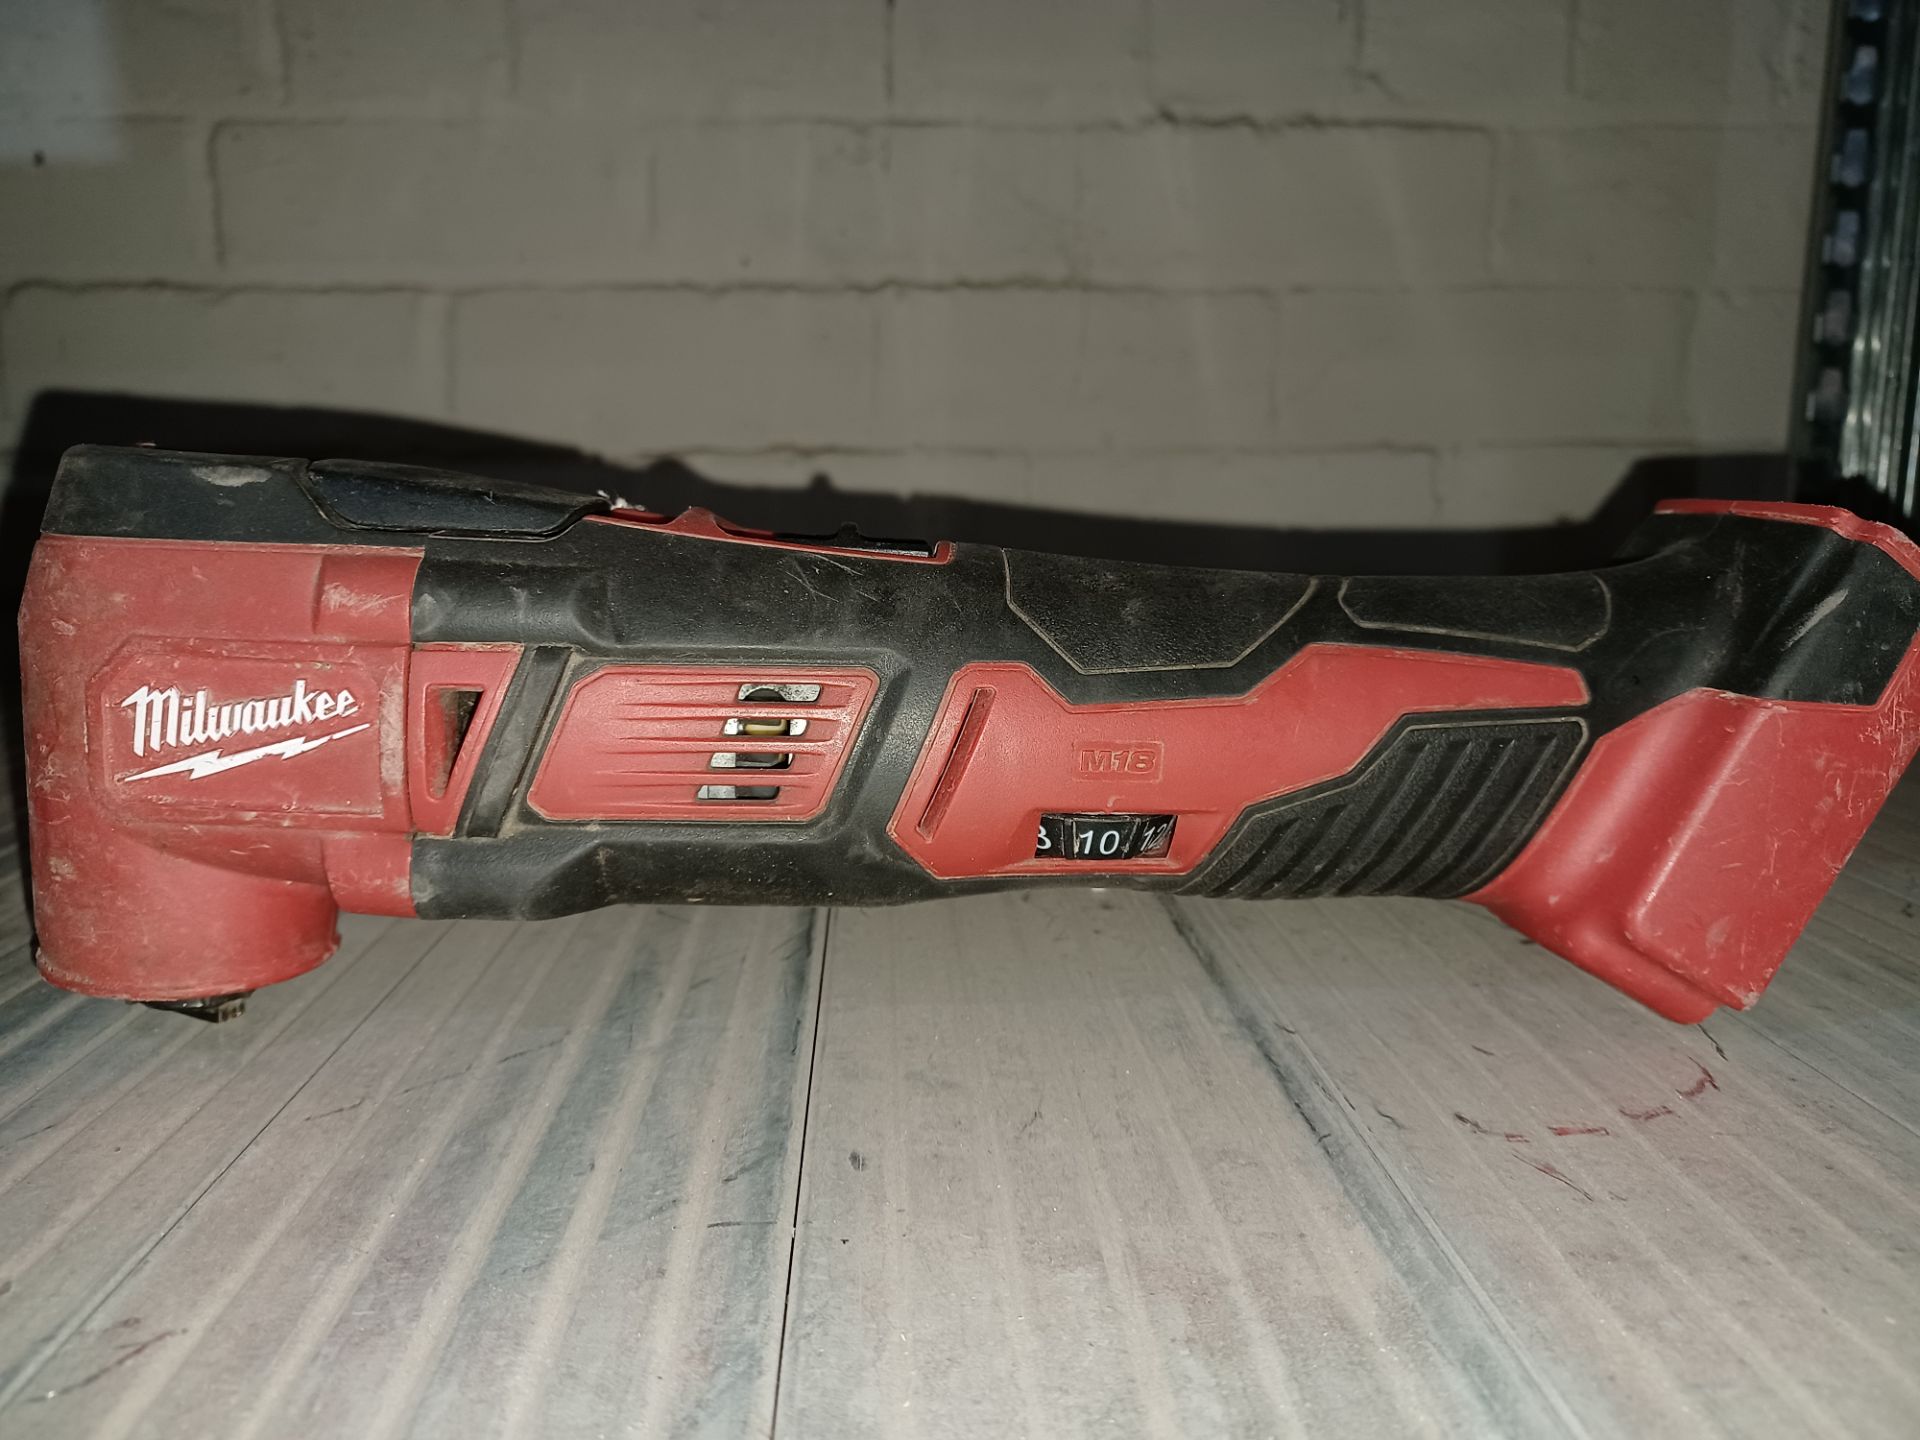 MILWAUKEE M18 BMT-0 18V LI-ION CORDLESS MULTI-TOOL (UNCHECKED, UNTESTED) PCK